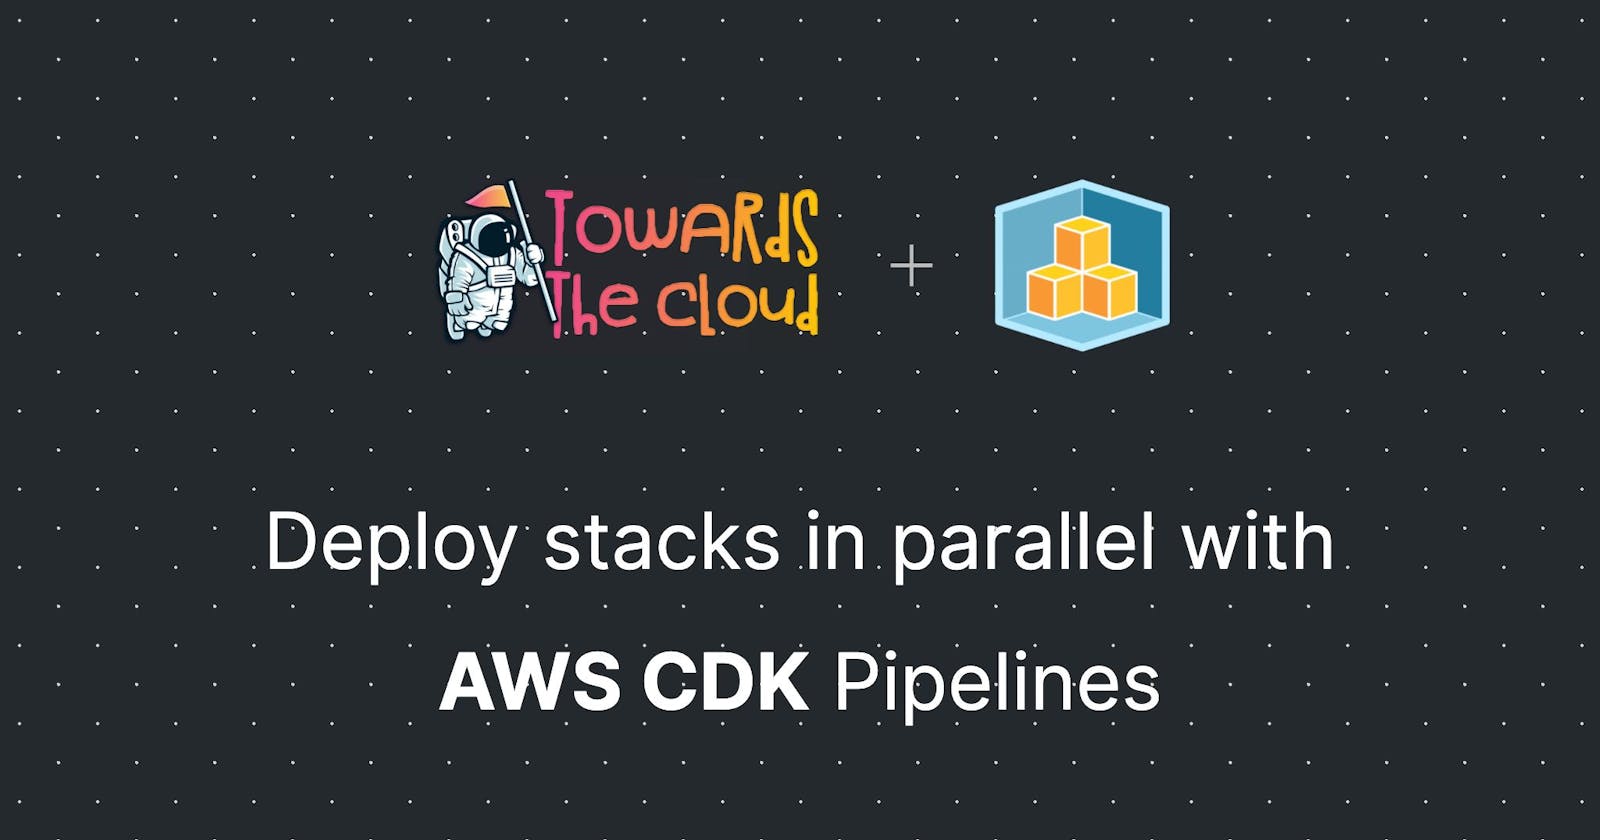 Deploy stacks in parallel with AWS CDK Pipelines